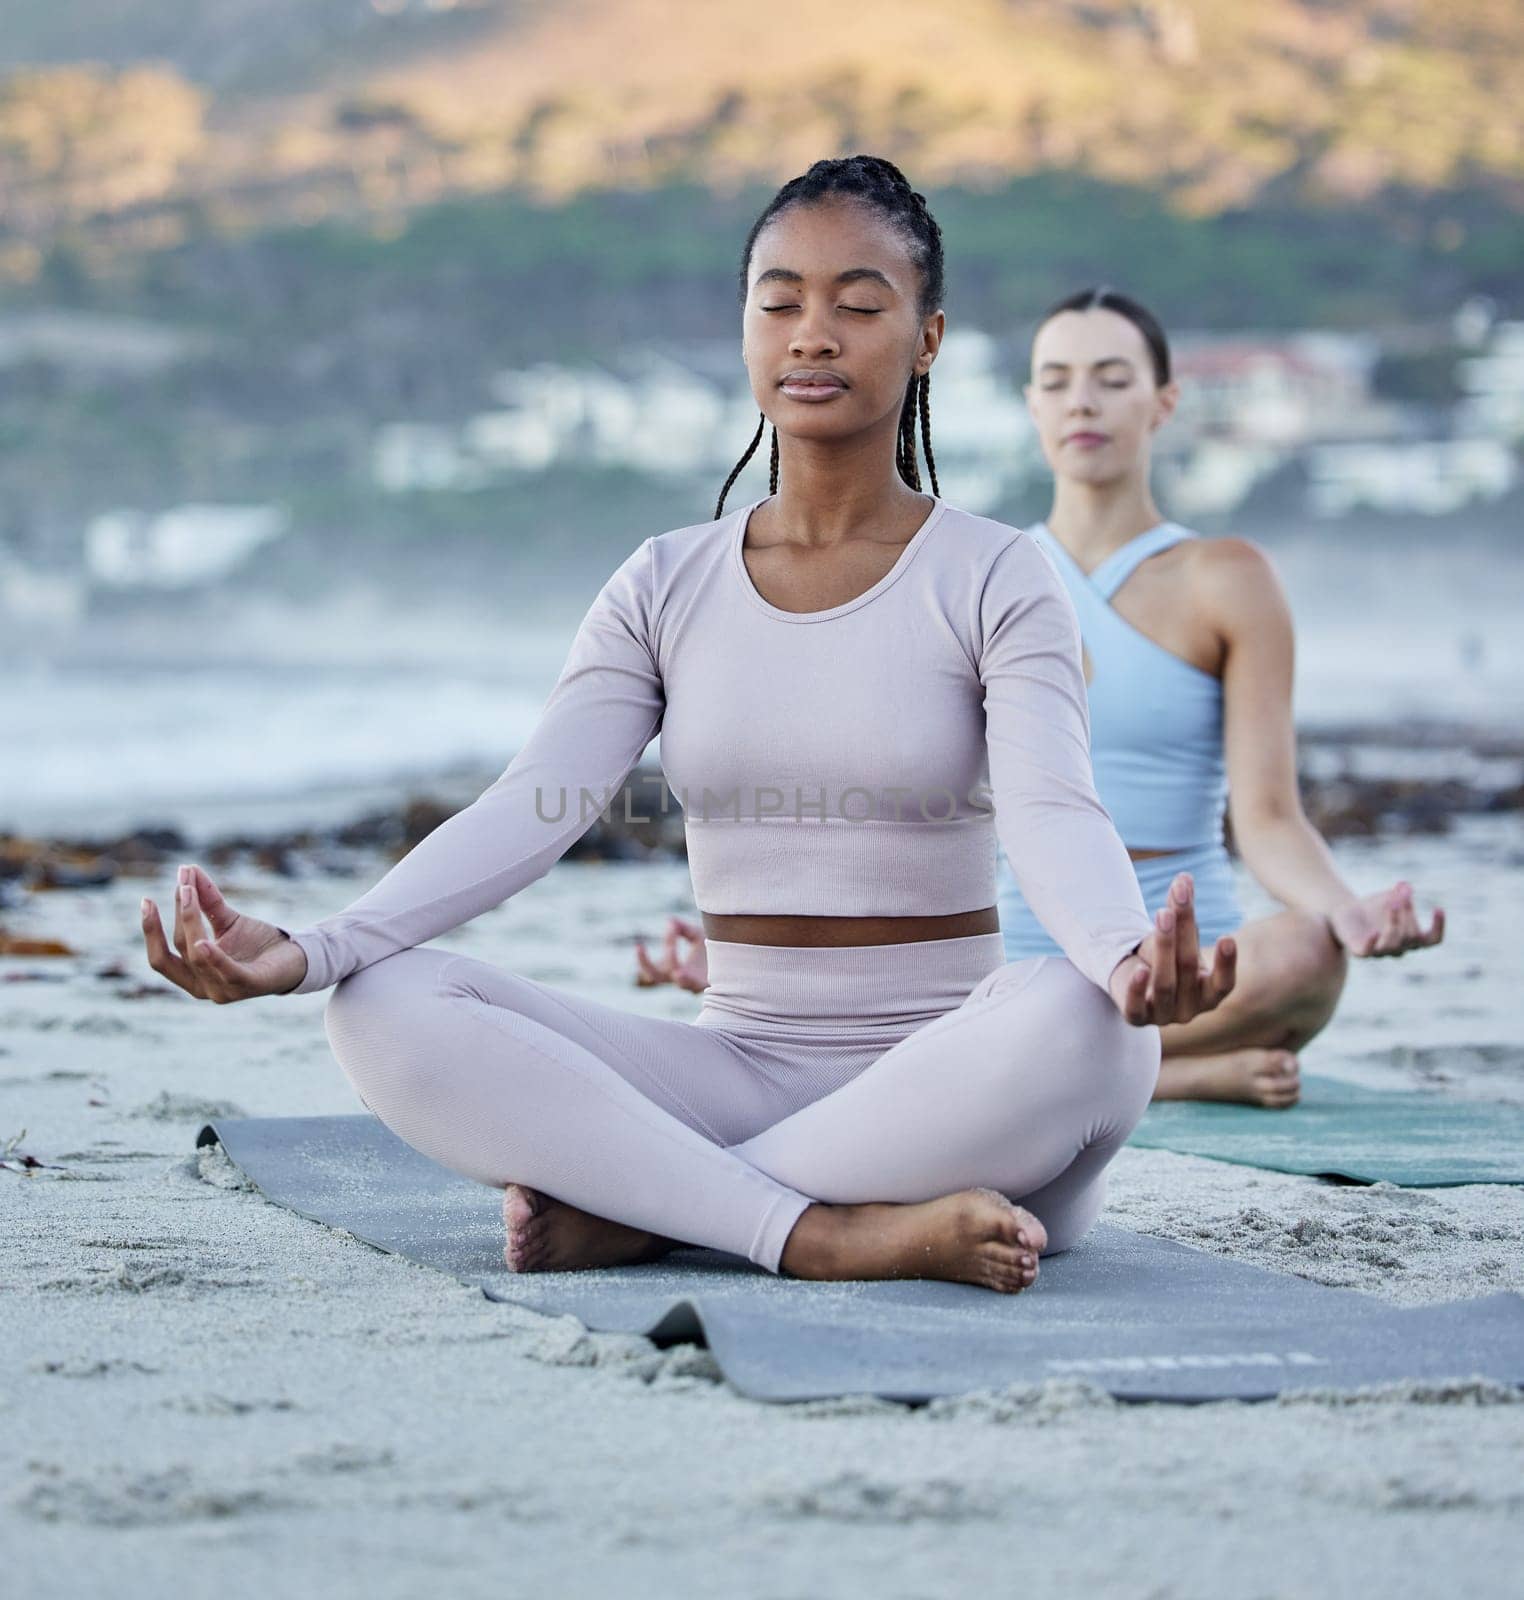 Beach meditation, diversity and yoga women meditate for chakra energy healing of soul, aura or spiritual balance. Freedom, lotus and zen people relax on sand for mindset peace, pilates or mindfulness.